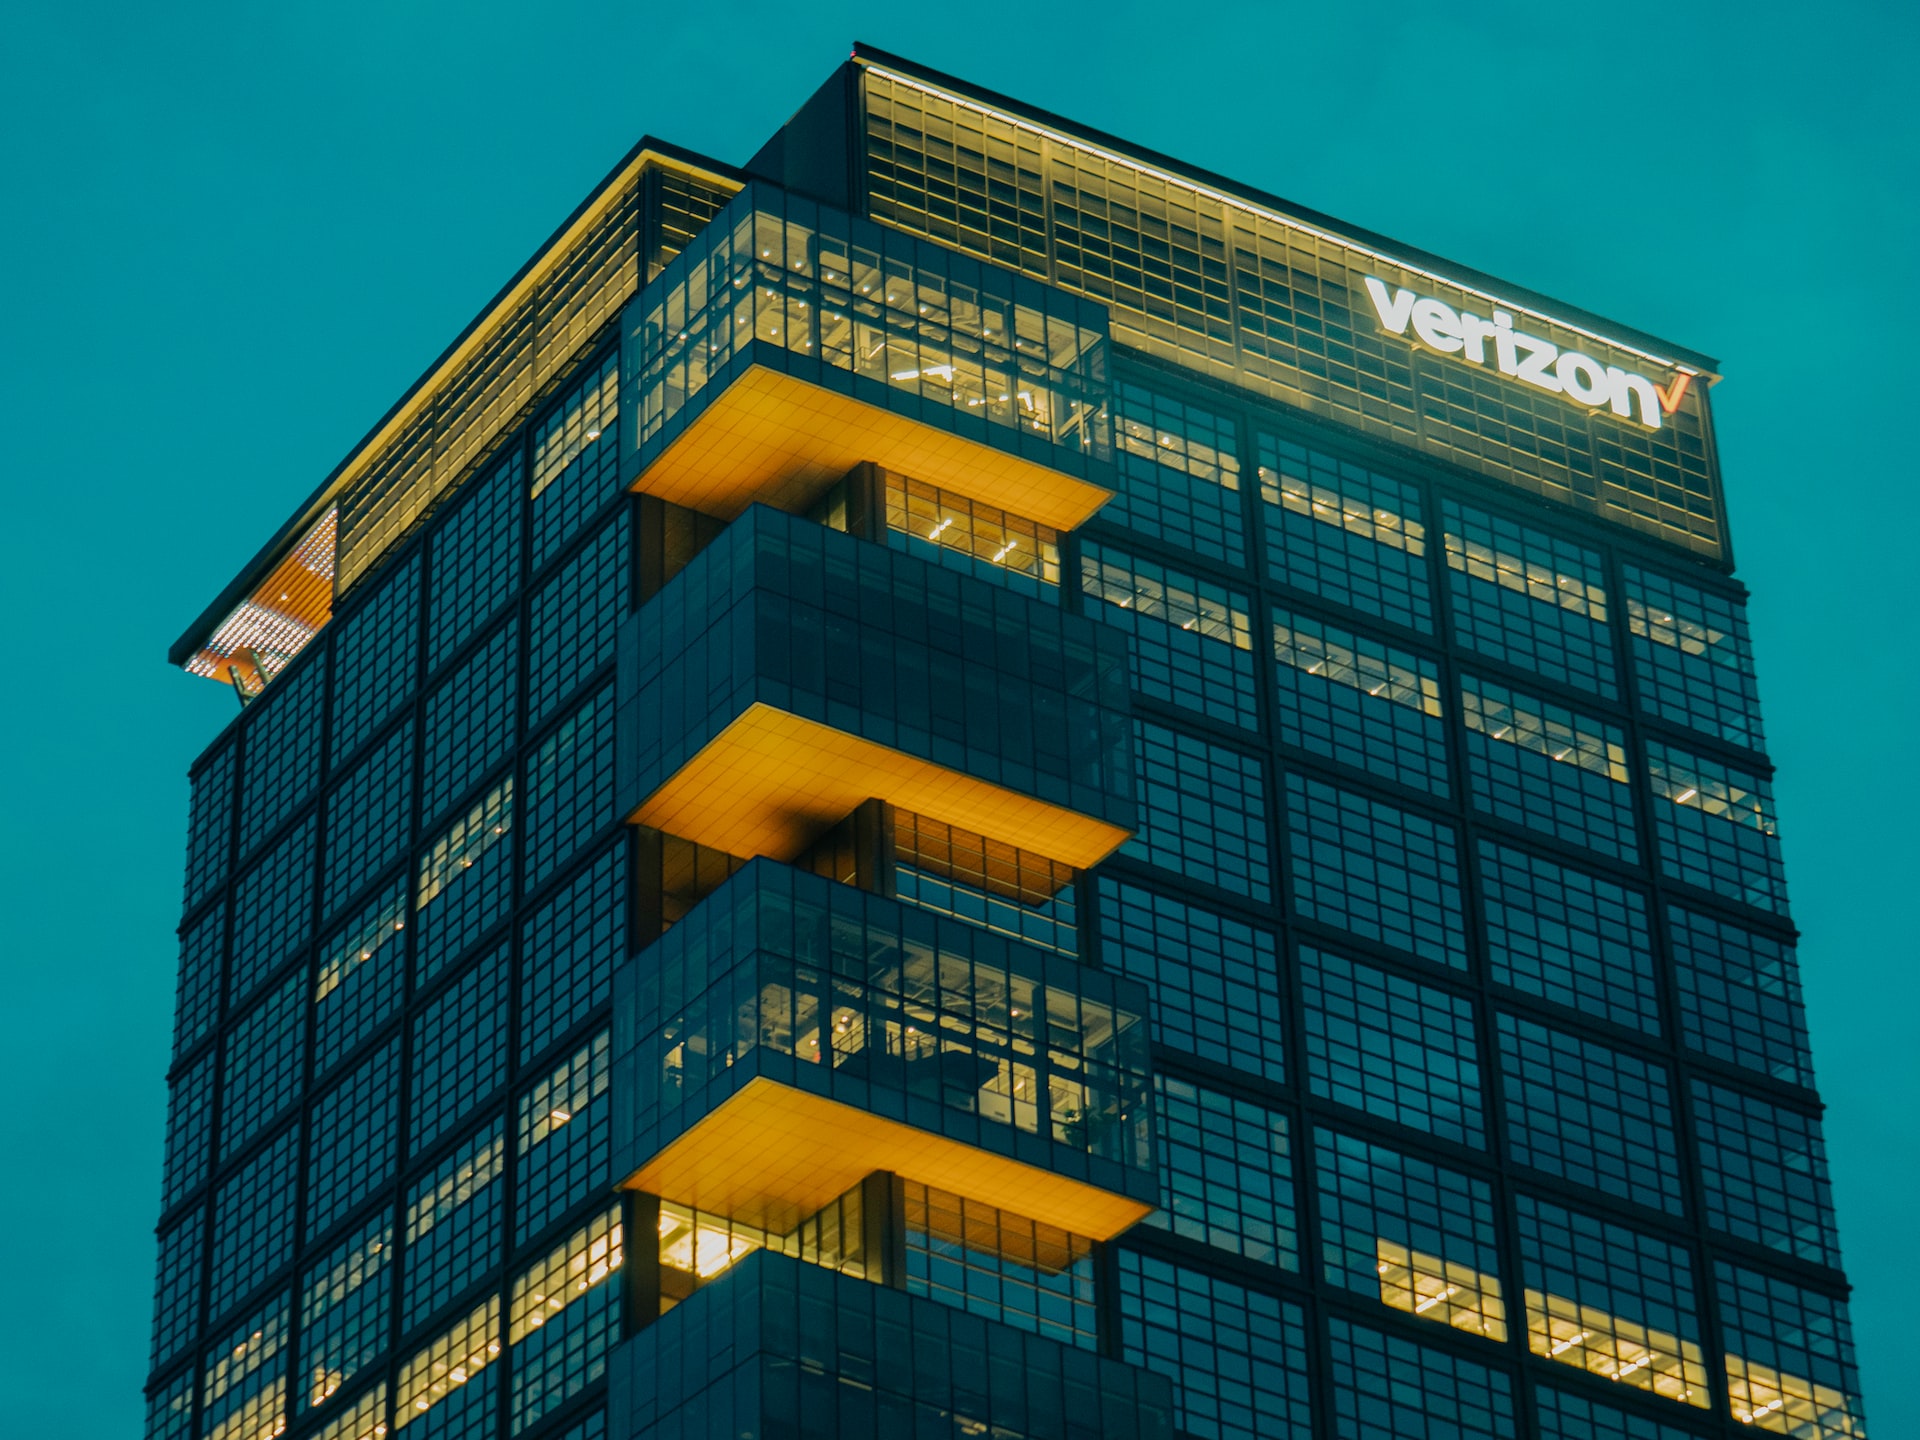 Verizon building in Boston, Massachusetts at night, with protruding offices on the corner